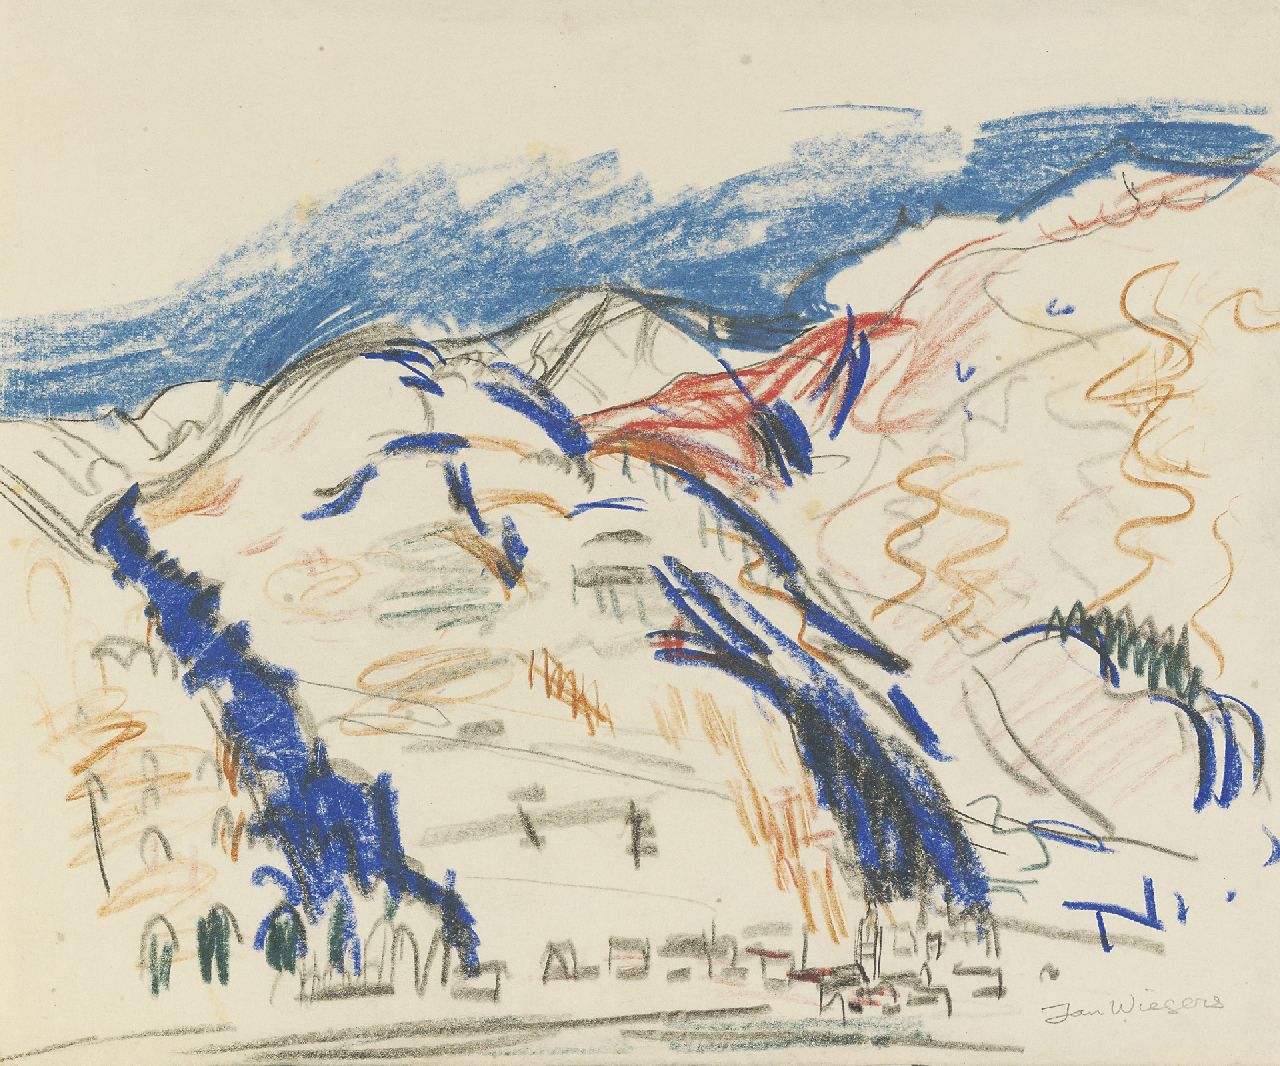 Wiegers J.  | Jan Wiegers, Mountain landscape near Davos, black chalk, coloured pencil and wax crayons on paper 23.7 x 28.5 cm, signed l.r.